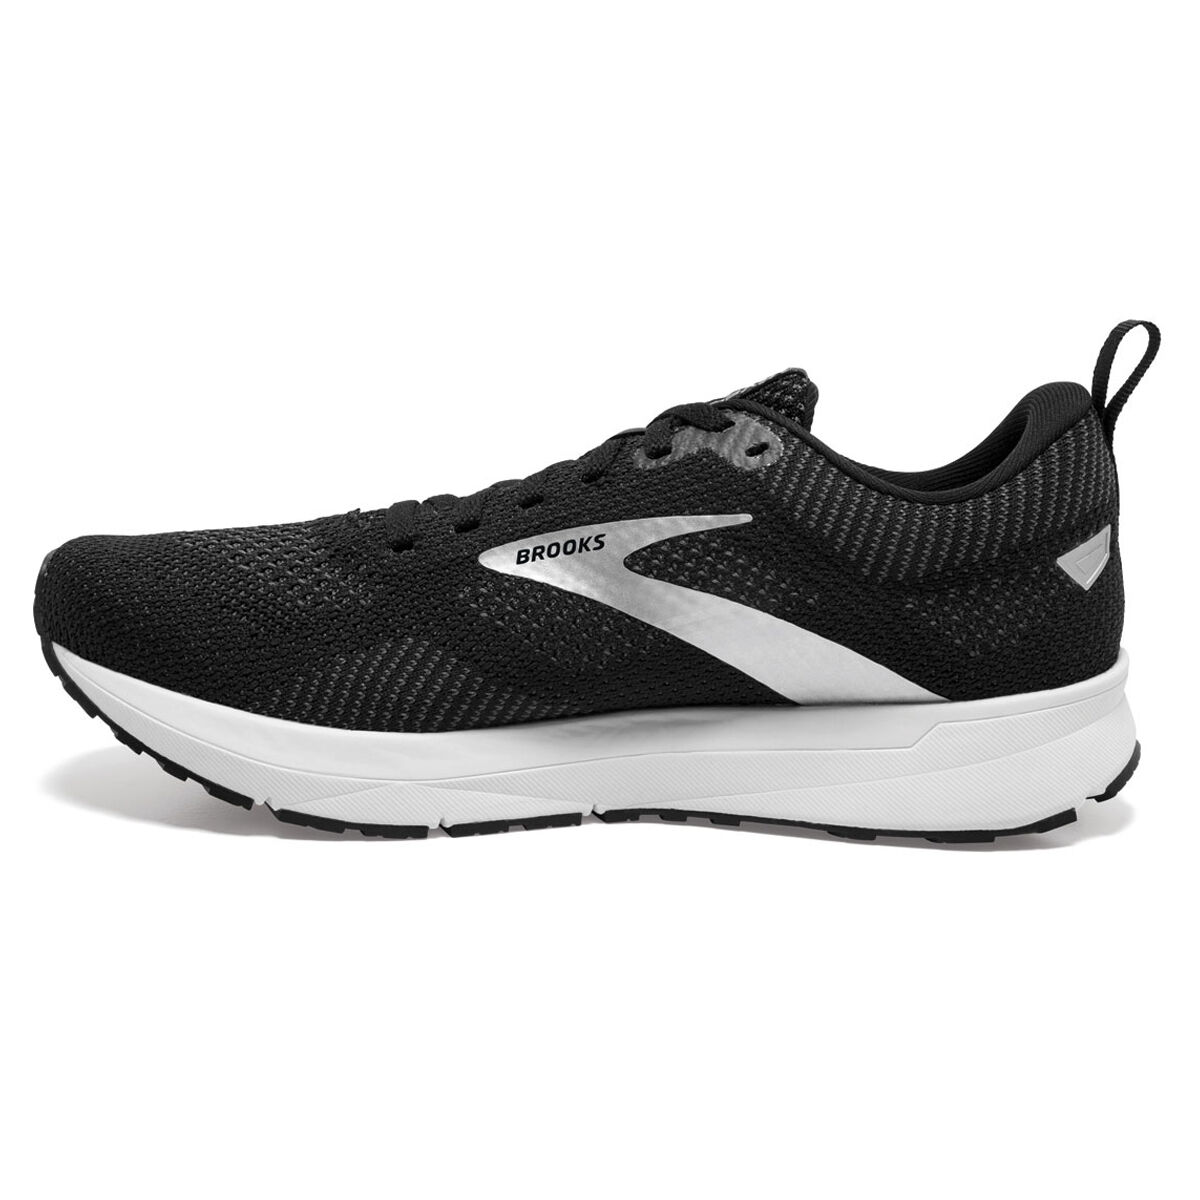 black and white brooks shoes